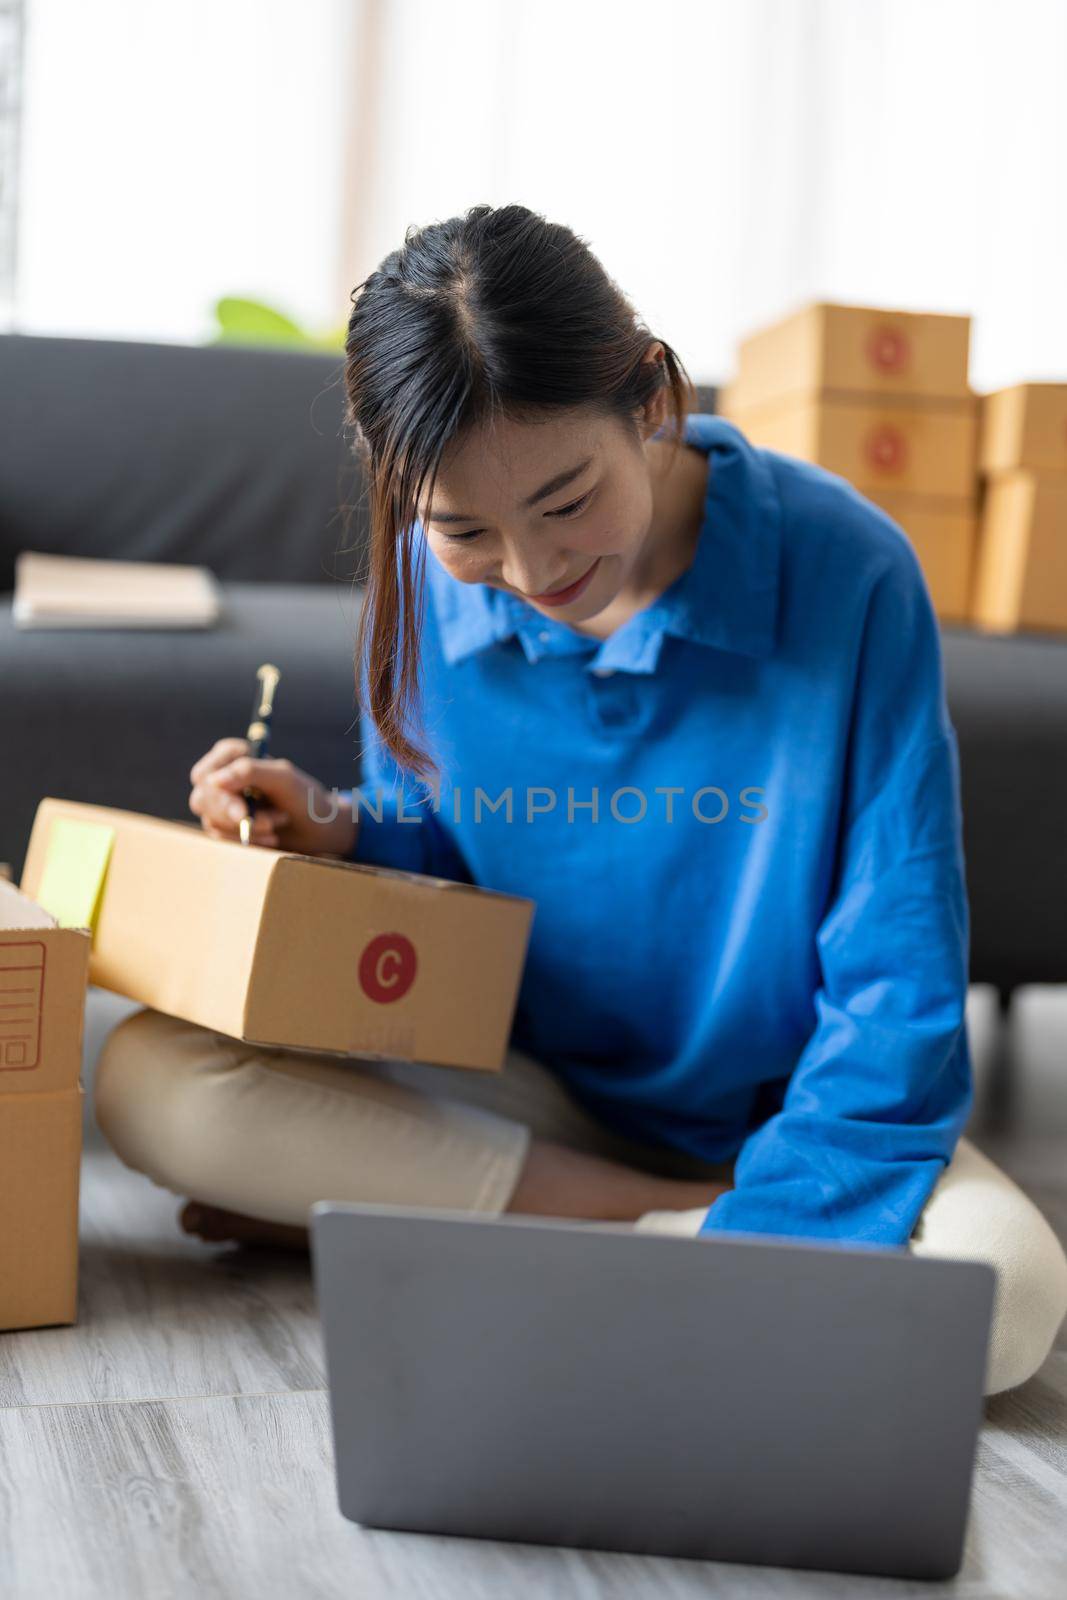 Shipping shopping online, startup small business owner writing address on cardboard box at workplace. Freelance Asian woman small business entrepreneur SME working with box at home by nateemee